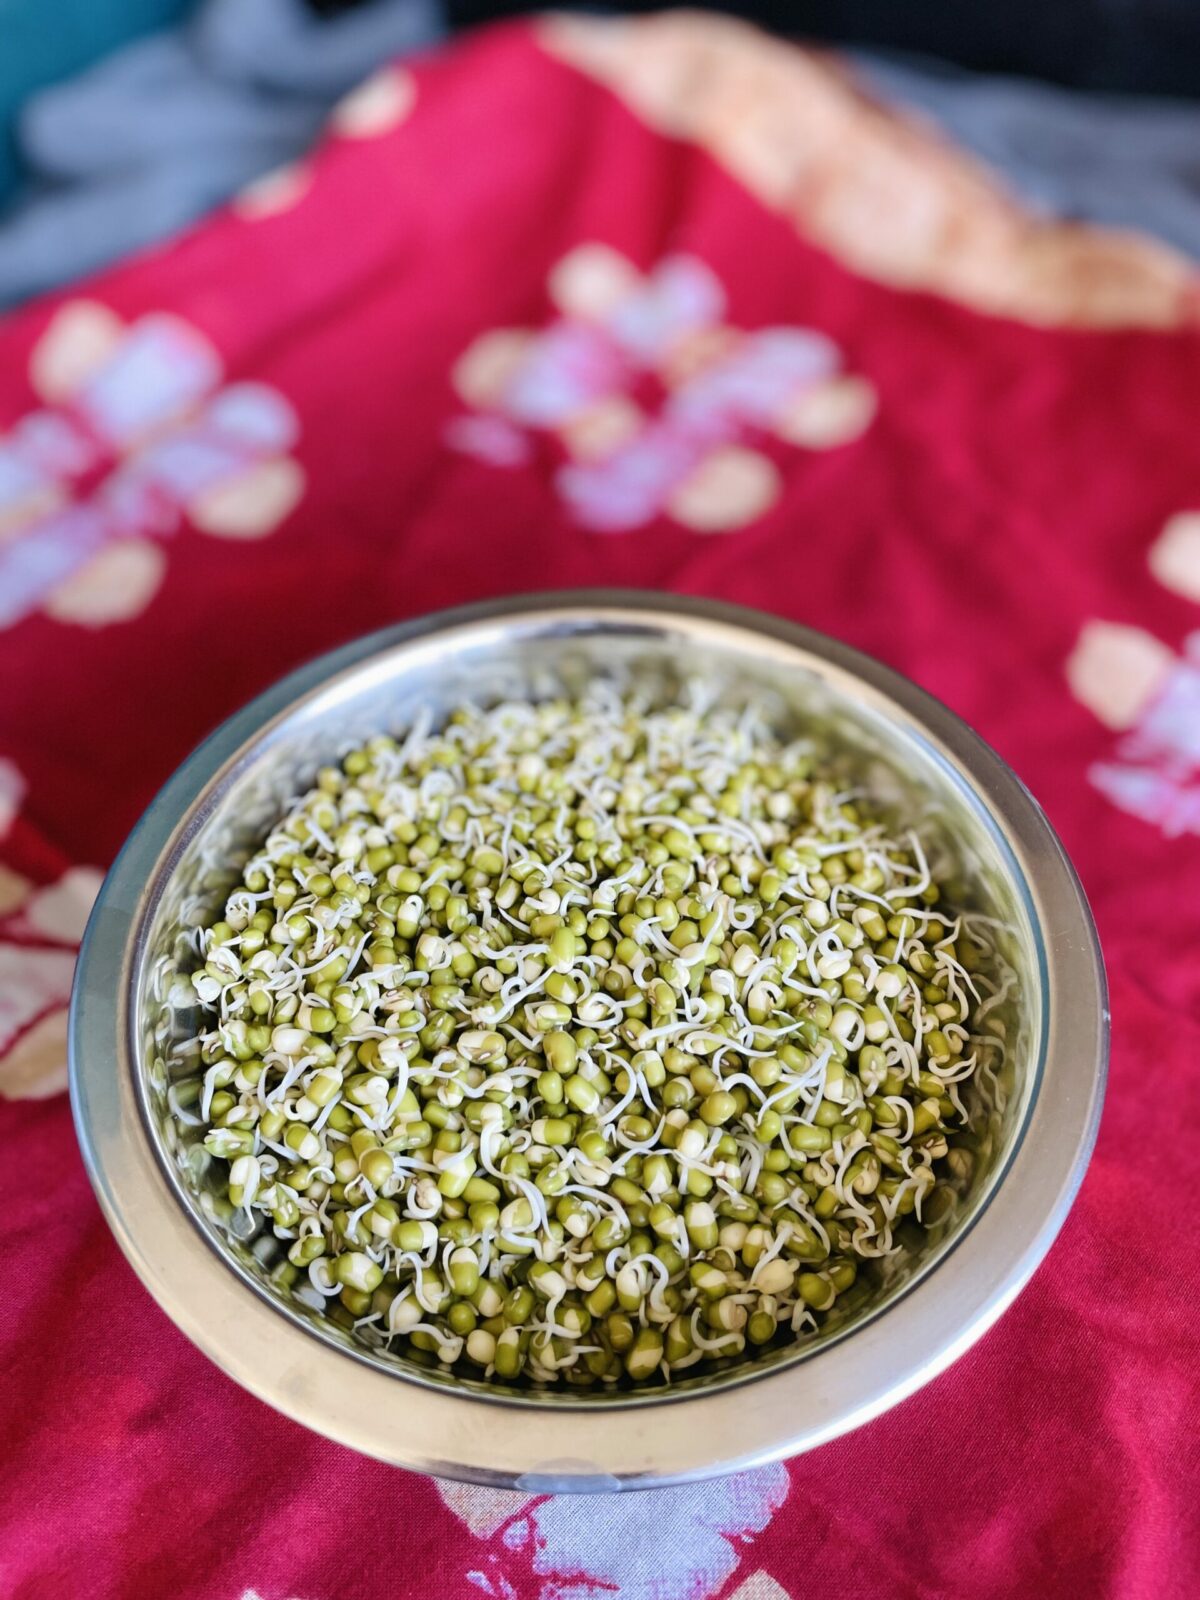 Sprouted moong dal in stainless steel bowl on red cloth.